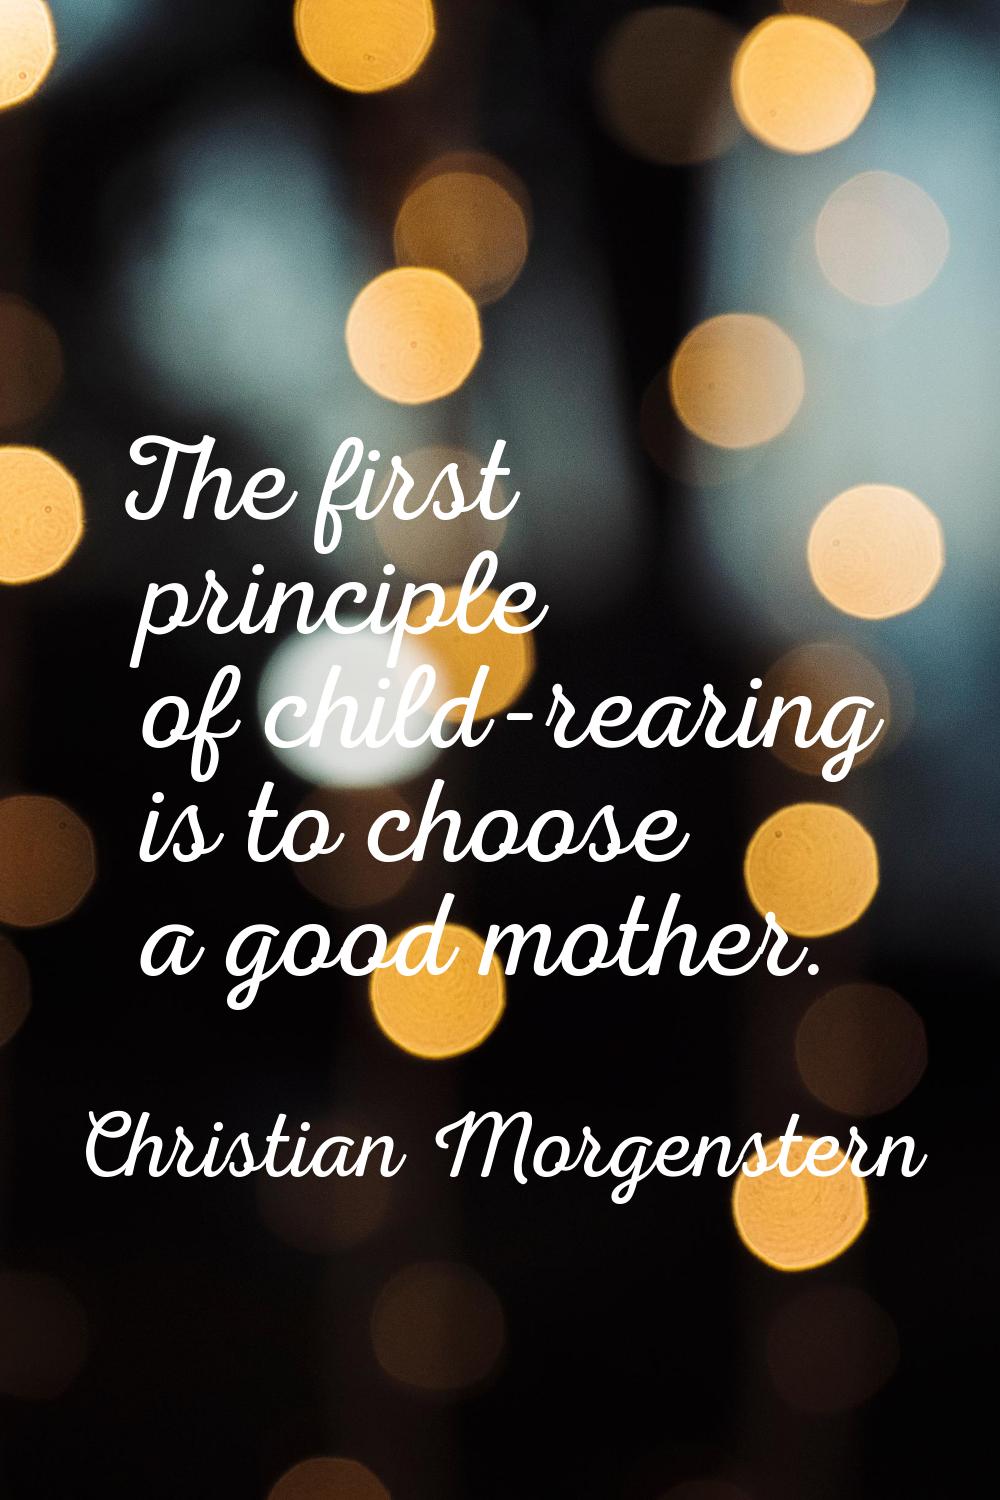 The first principle of child-rearing is to choose a good mother.